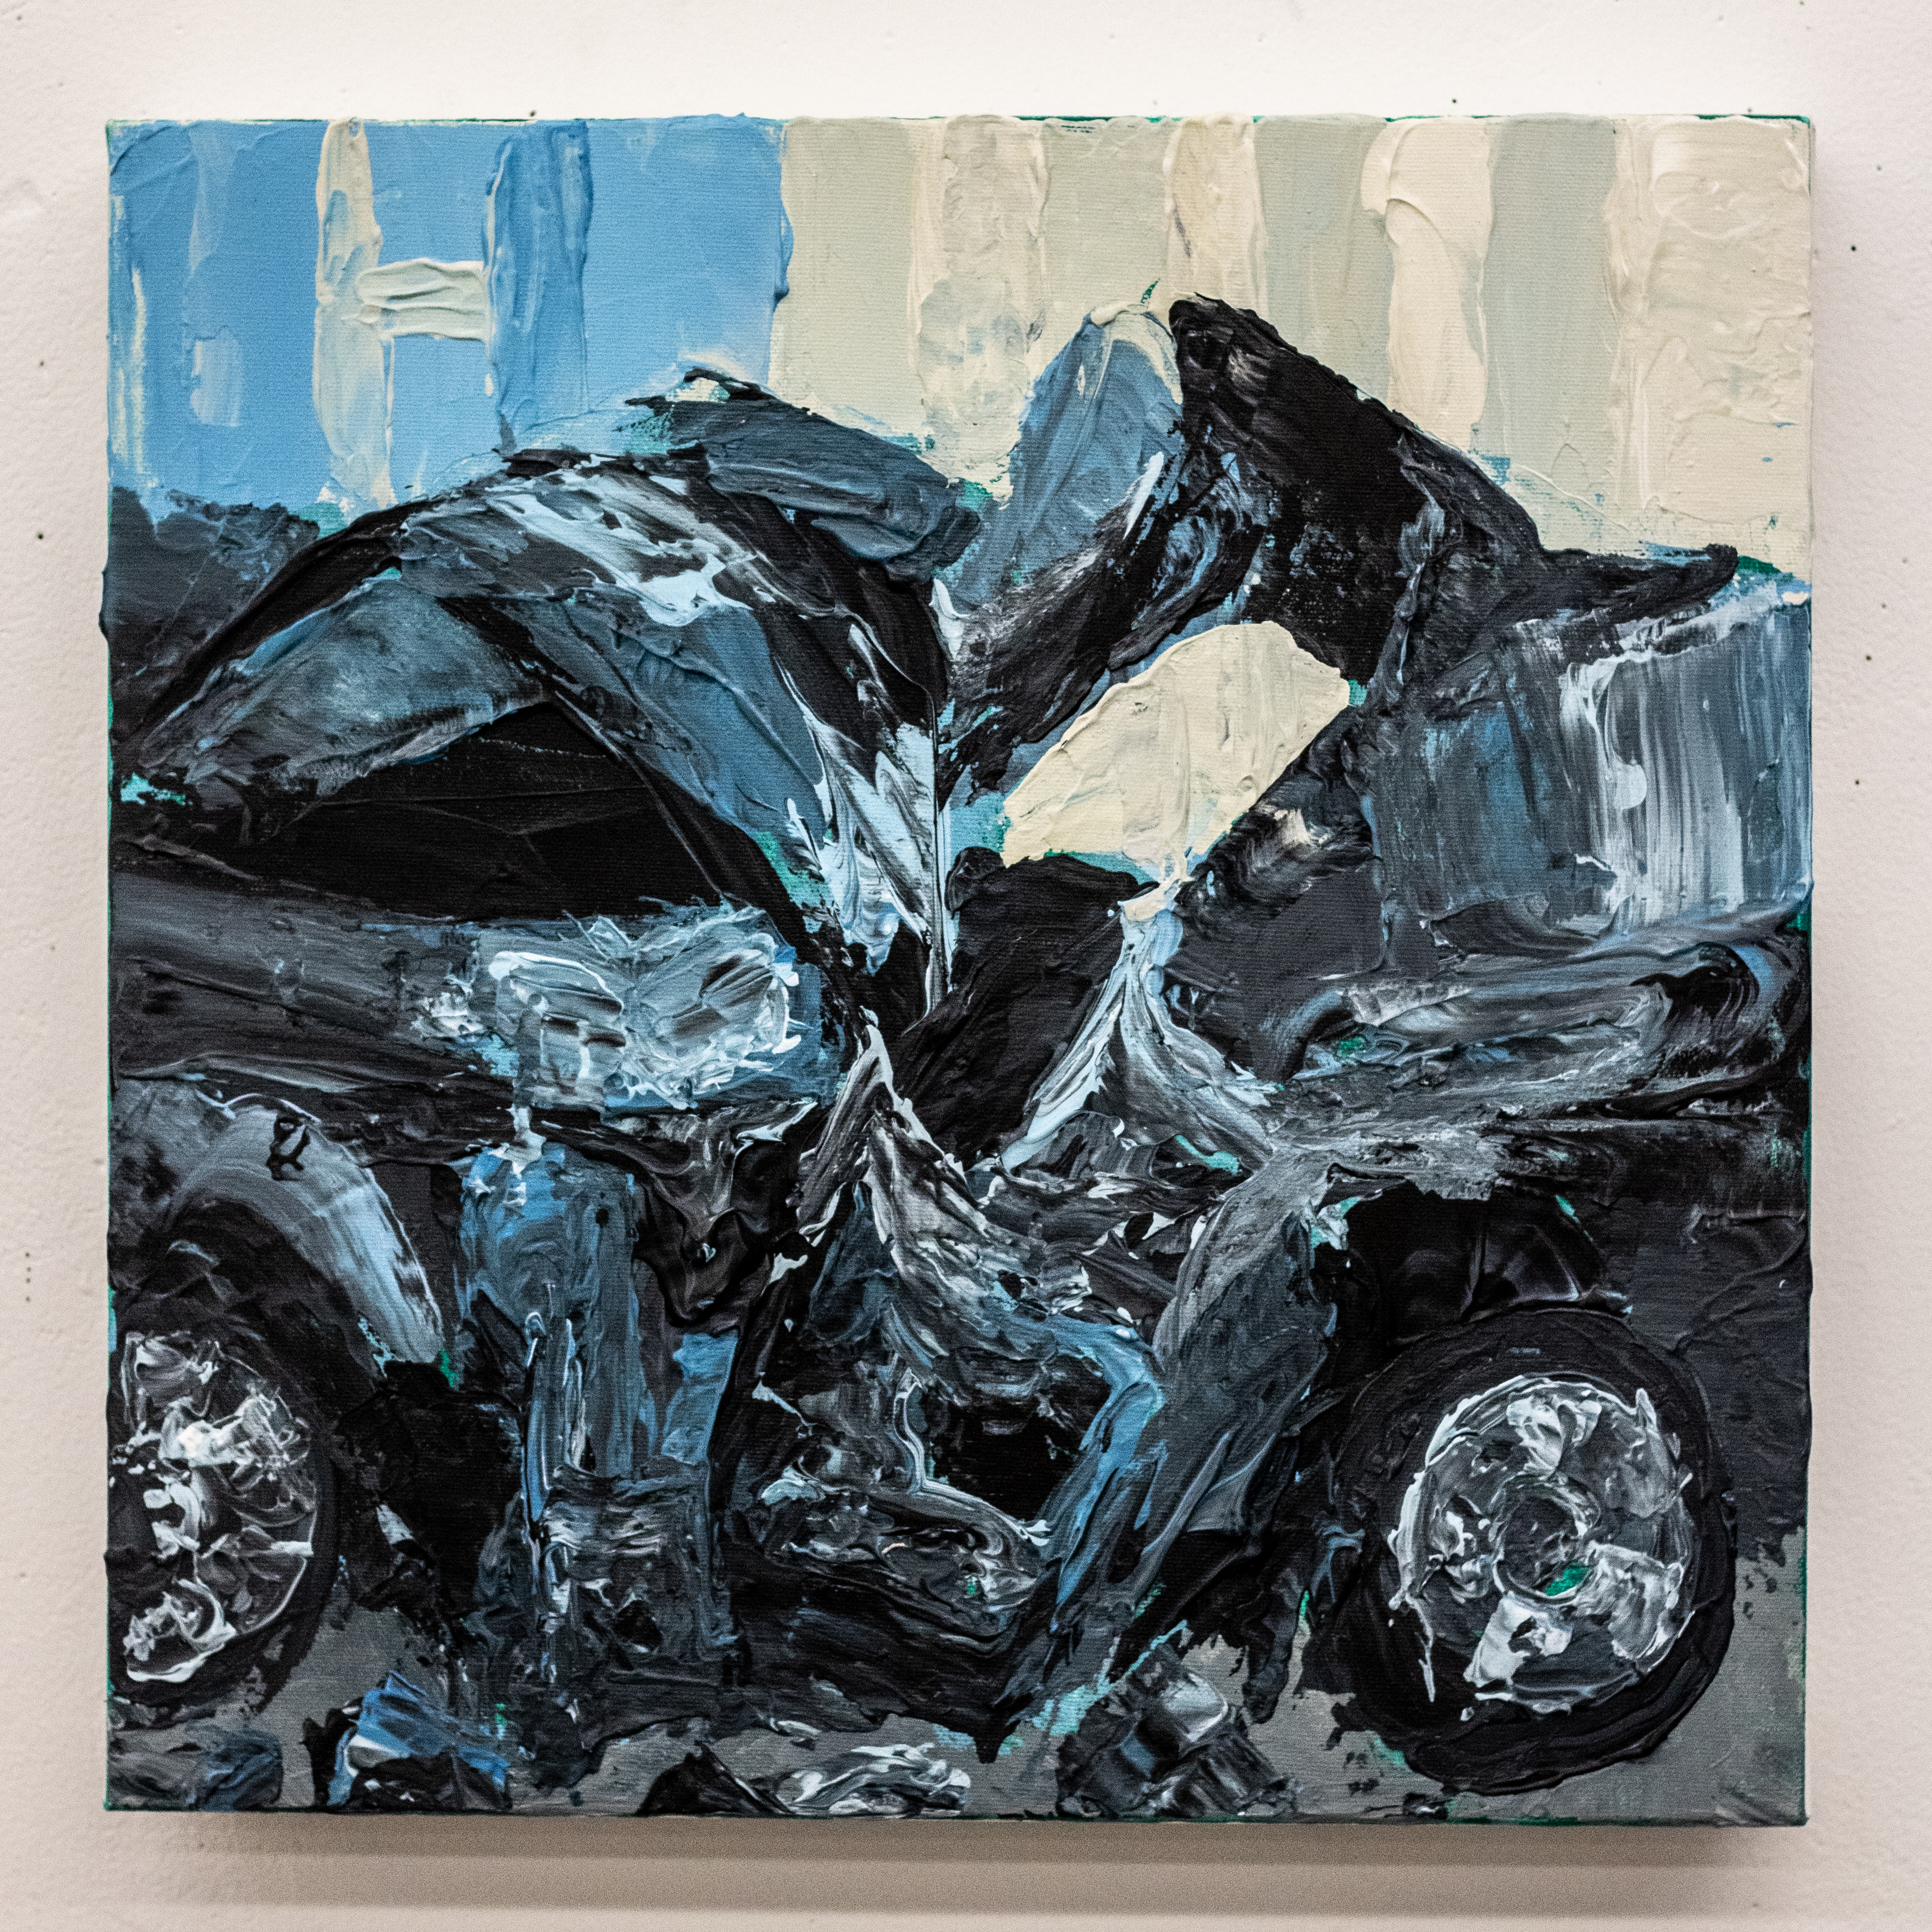 Painting of a crumpled car in blue, black, and white.